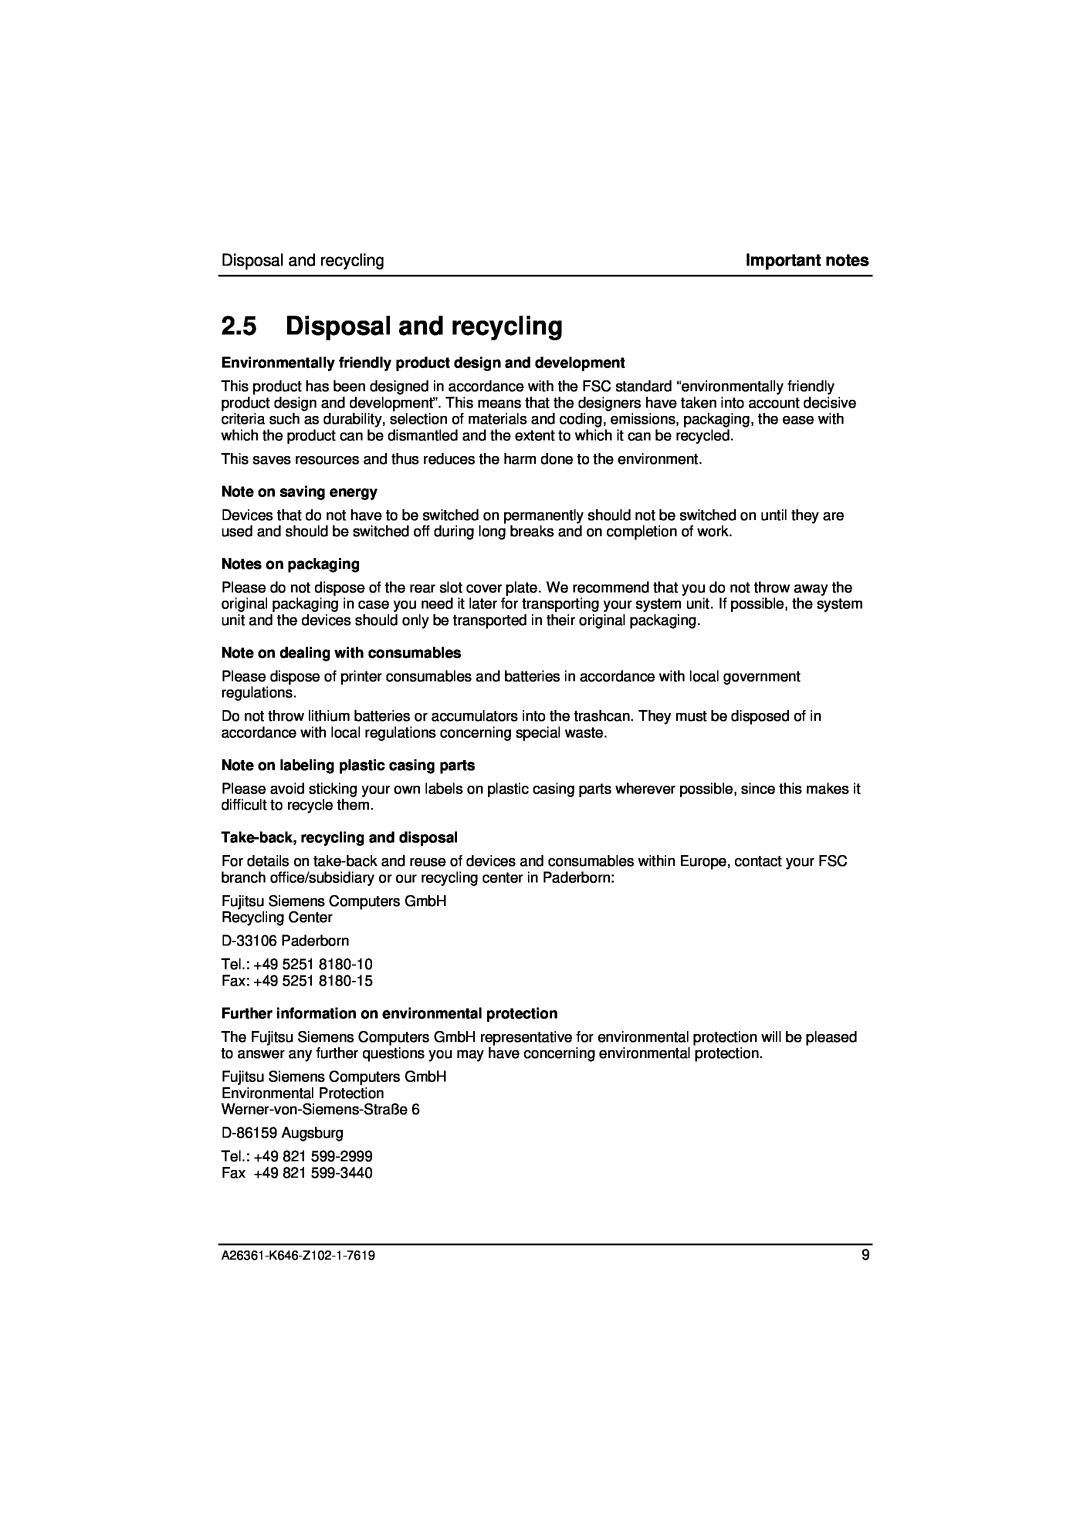 Fujitsu B120 manual Disposal and recycling, Environmentally friendly product design and development, Note on saving energy 